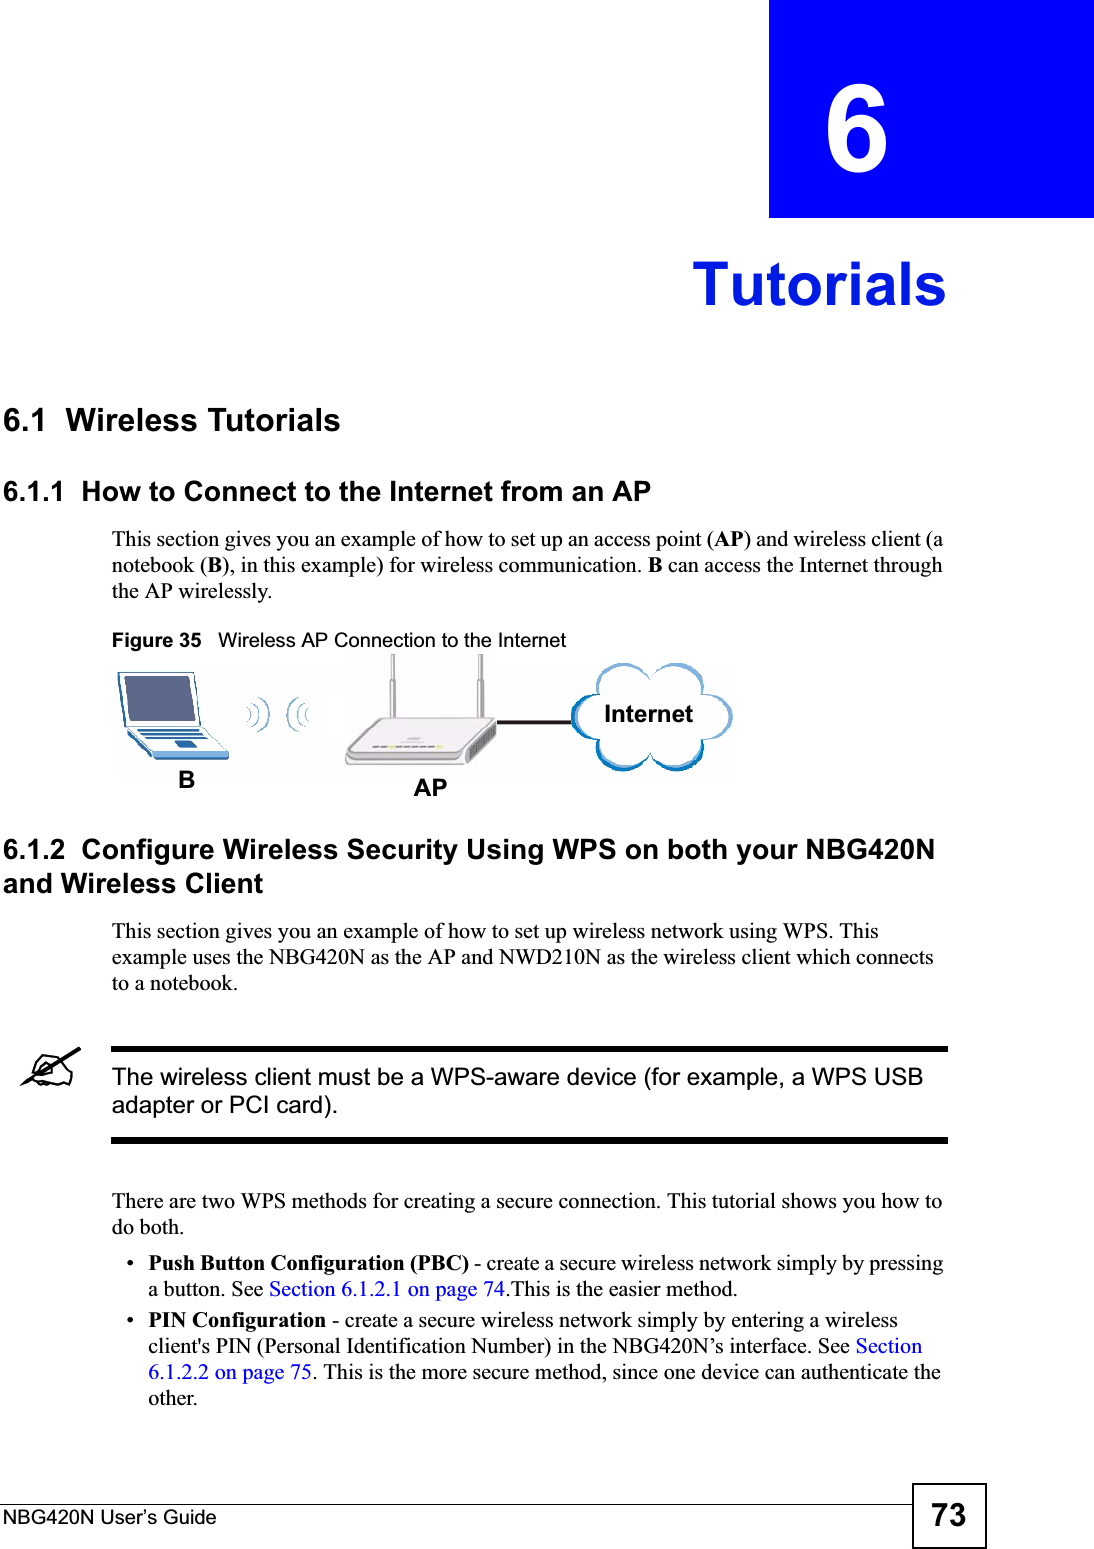 NBG420N User’s Guide 73CHAPTER  6 Tutorials6.1  Wireless Tutorials6.1.1  How to Connect to the Internet from an APThis section gives you an example of how to set up an access point (AP) and wireless client (a notebook (B), in this example) for wireless communication. B can access the Internet through the AP wirelessly.Figure 35   Wireless AP Connection to the Internet6.1.2  Configure Wireless Security Using WPS on both your NBG420N and Wireless ClientThis section gives you an example of how to set up wireless network using WPS. This example uses the NBG420N as the AP and NWD210N as the wireless client which connects to a notebook. &quot;The wireless client must be a WPS-aware device (for example, a WPS USB adapter or PCI card).There are two WPS methods for creating a secure connection. This tutorial shows you how to do both.•Push Button Configuration (PBC) - create a secure wireless network simply by pressing a button. See Section 6.1.2.1 on page 74.This is the easier method.•PIN Configuration - create a secure wireless network simply by entering a wireless client&apos;s PIN (Personal Identification Number) in the NBG420N’s interface. See Section6.1.2.2 on page 75. This is the more secure method, since one device can authenticate the other.BAPInternet